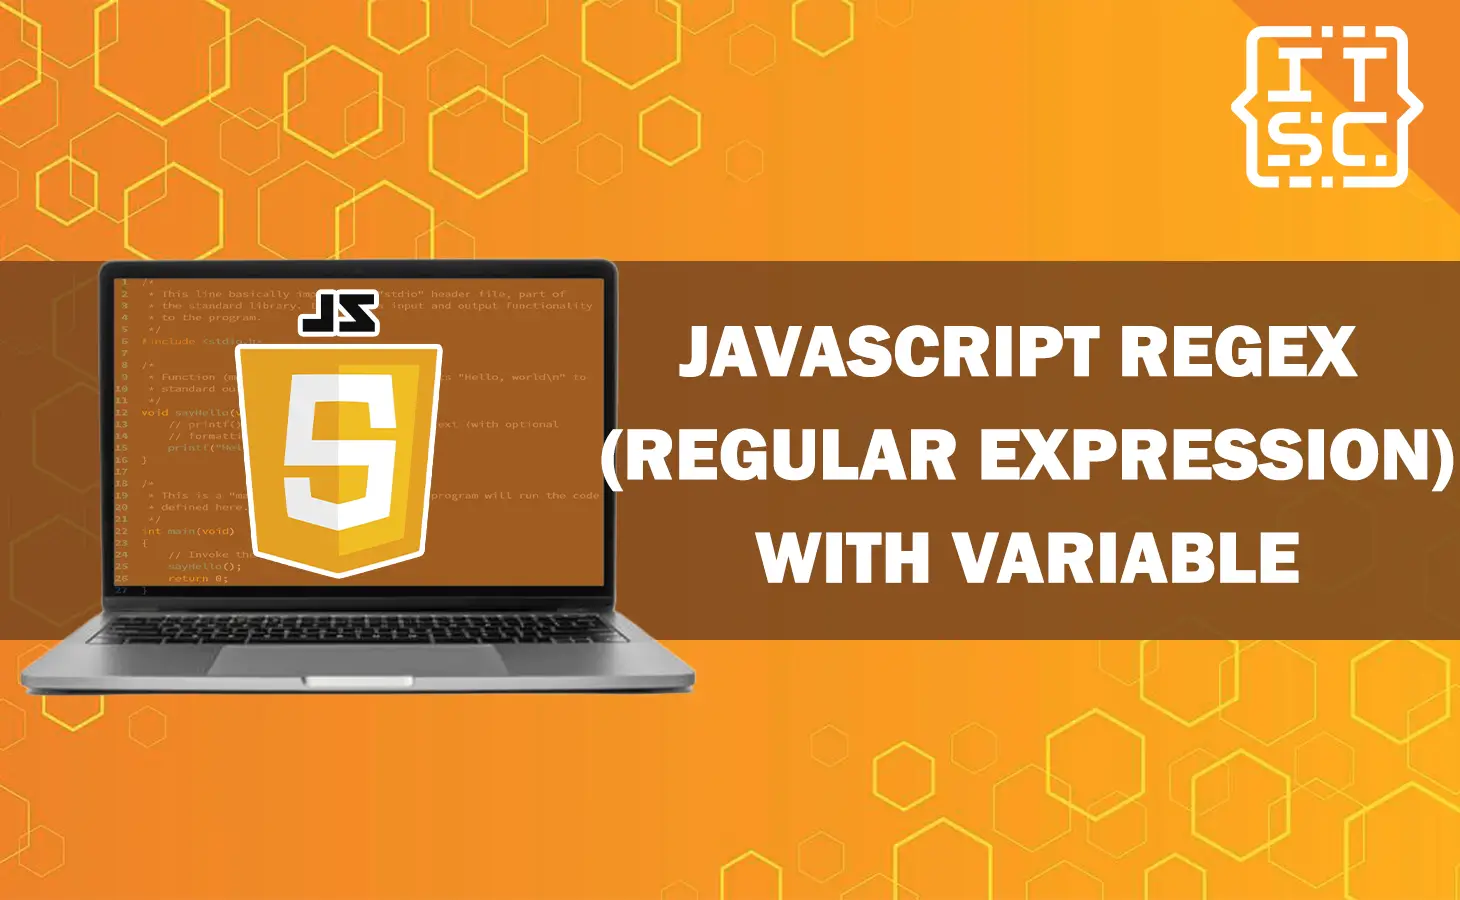 How to use a variable in regex pattern in JavaScript?